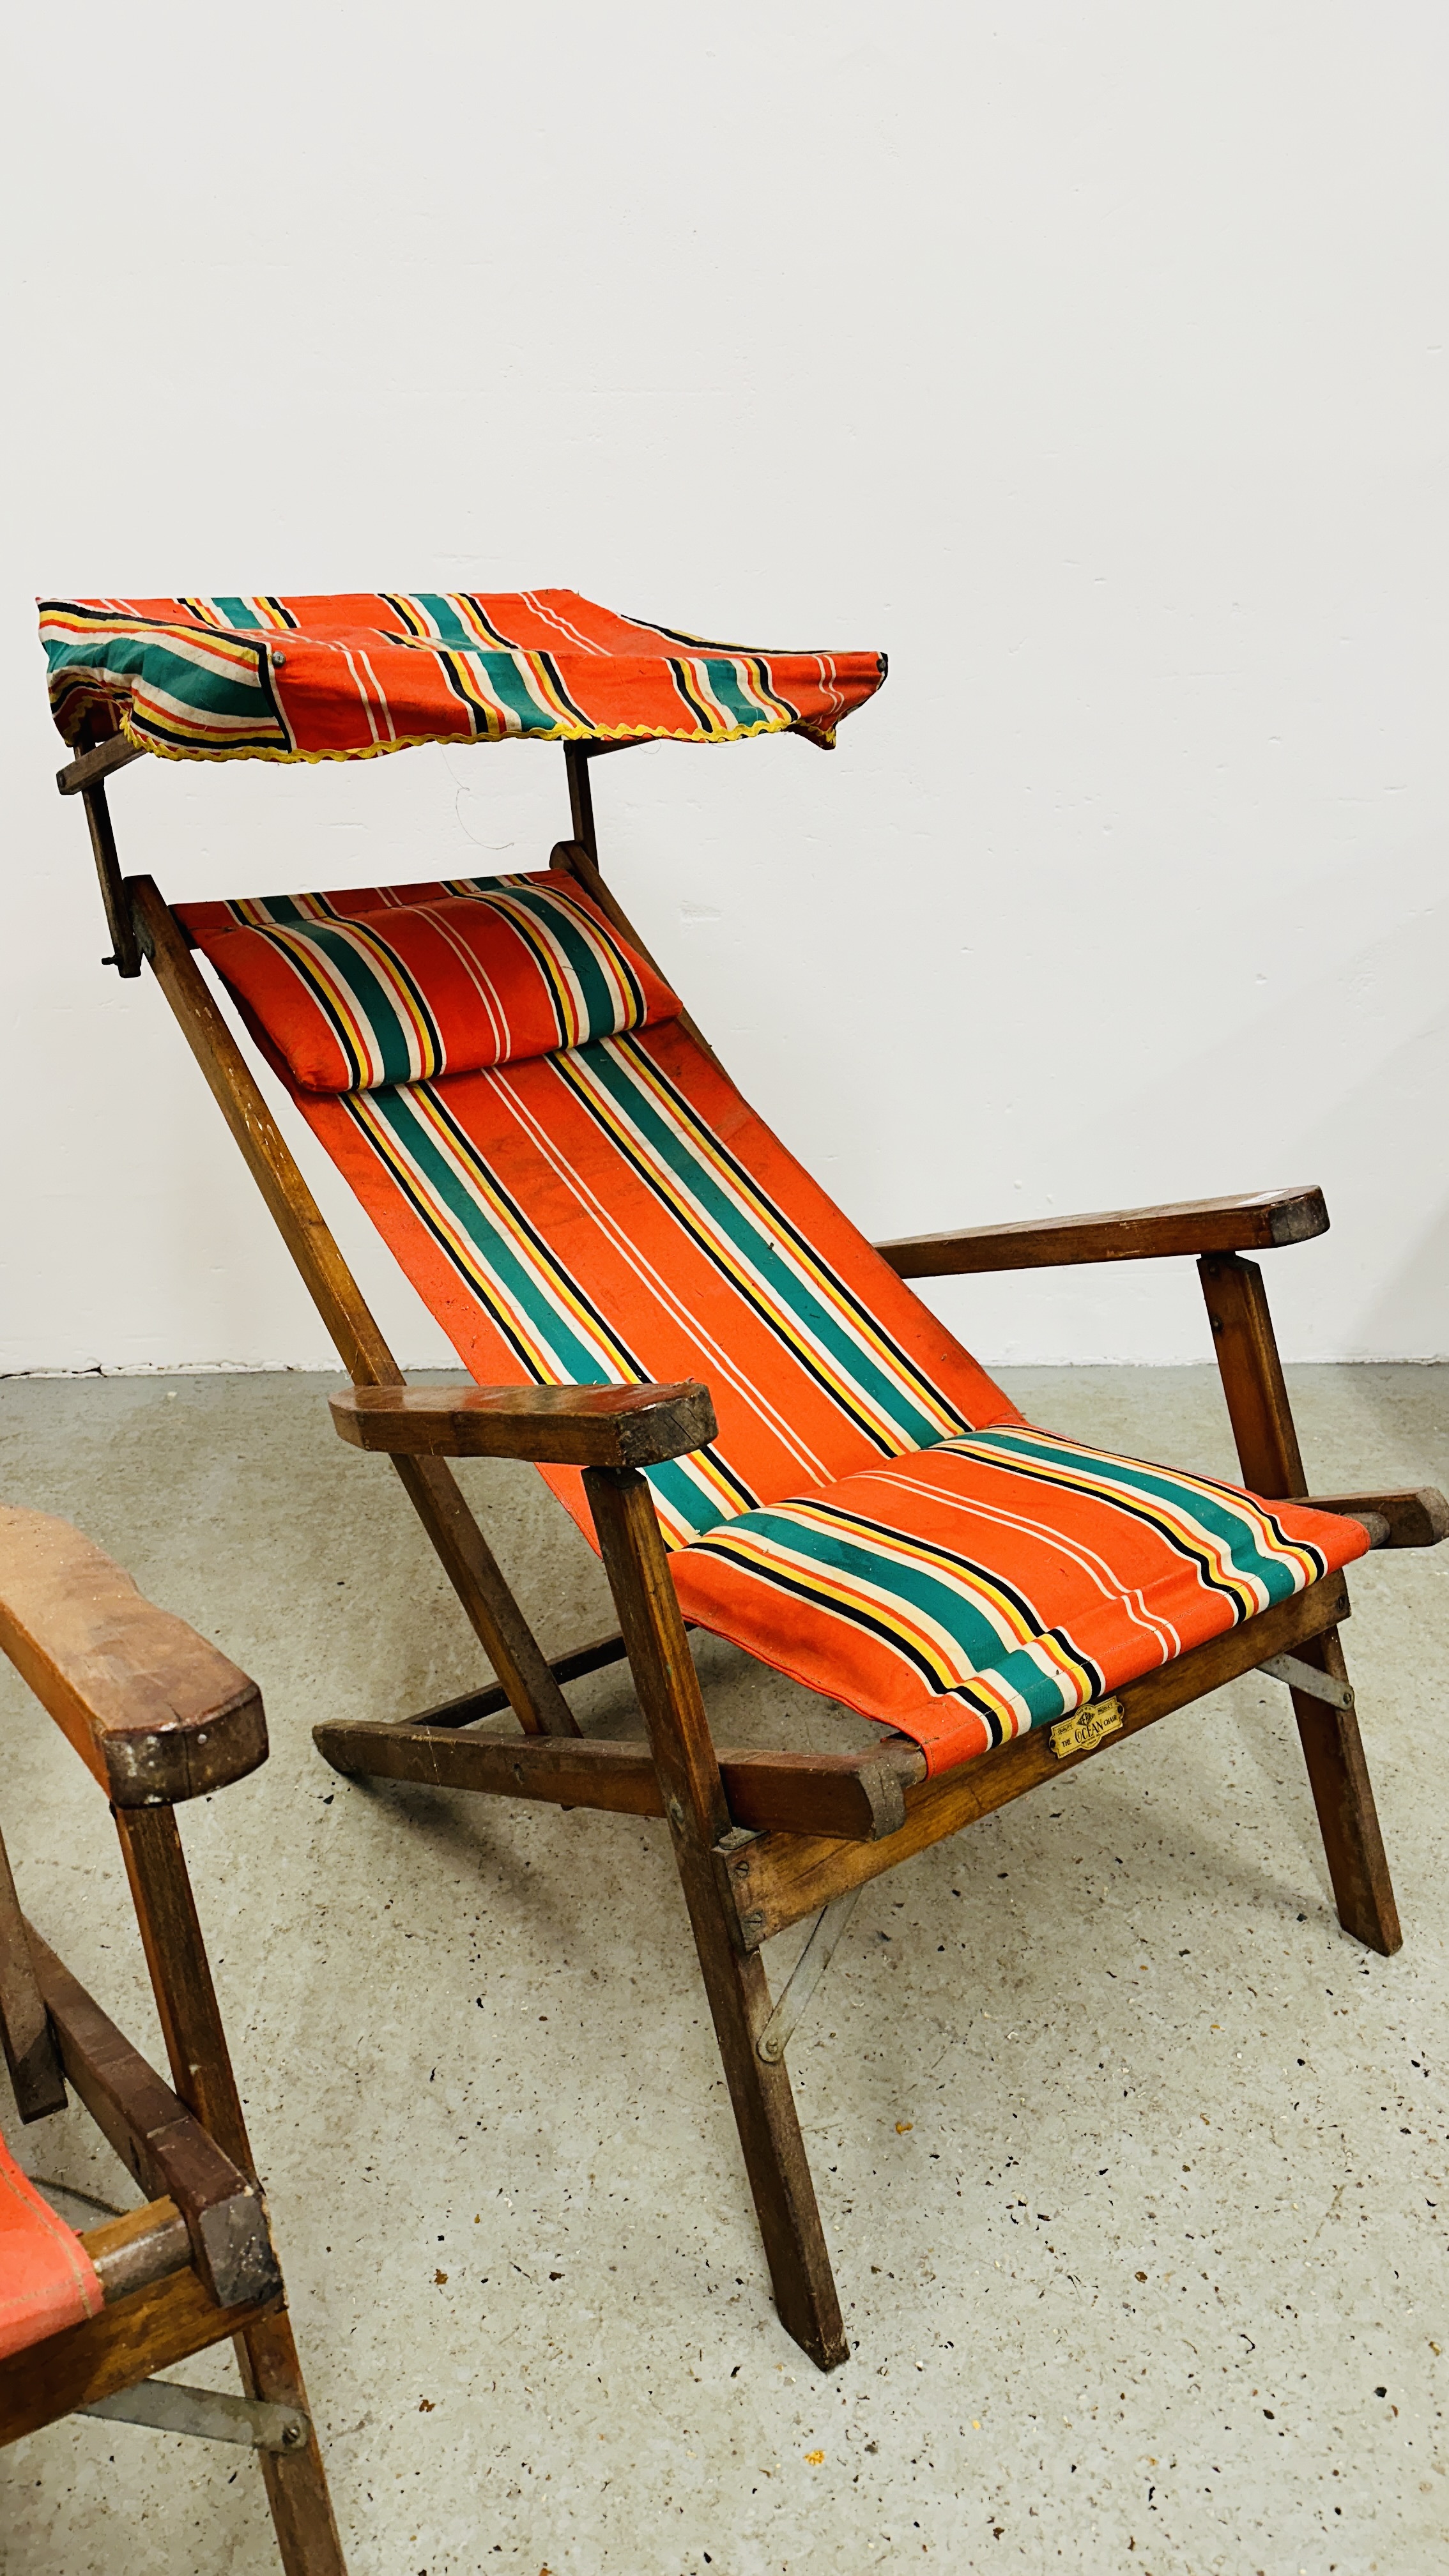 A PAIR OF GEEBRO "THE OCEAN CHAIR" DECK CHAIRS WITH SUN SHADES. - Image 9 of 13